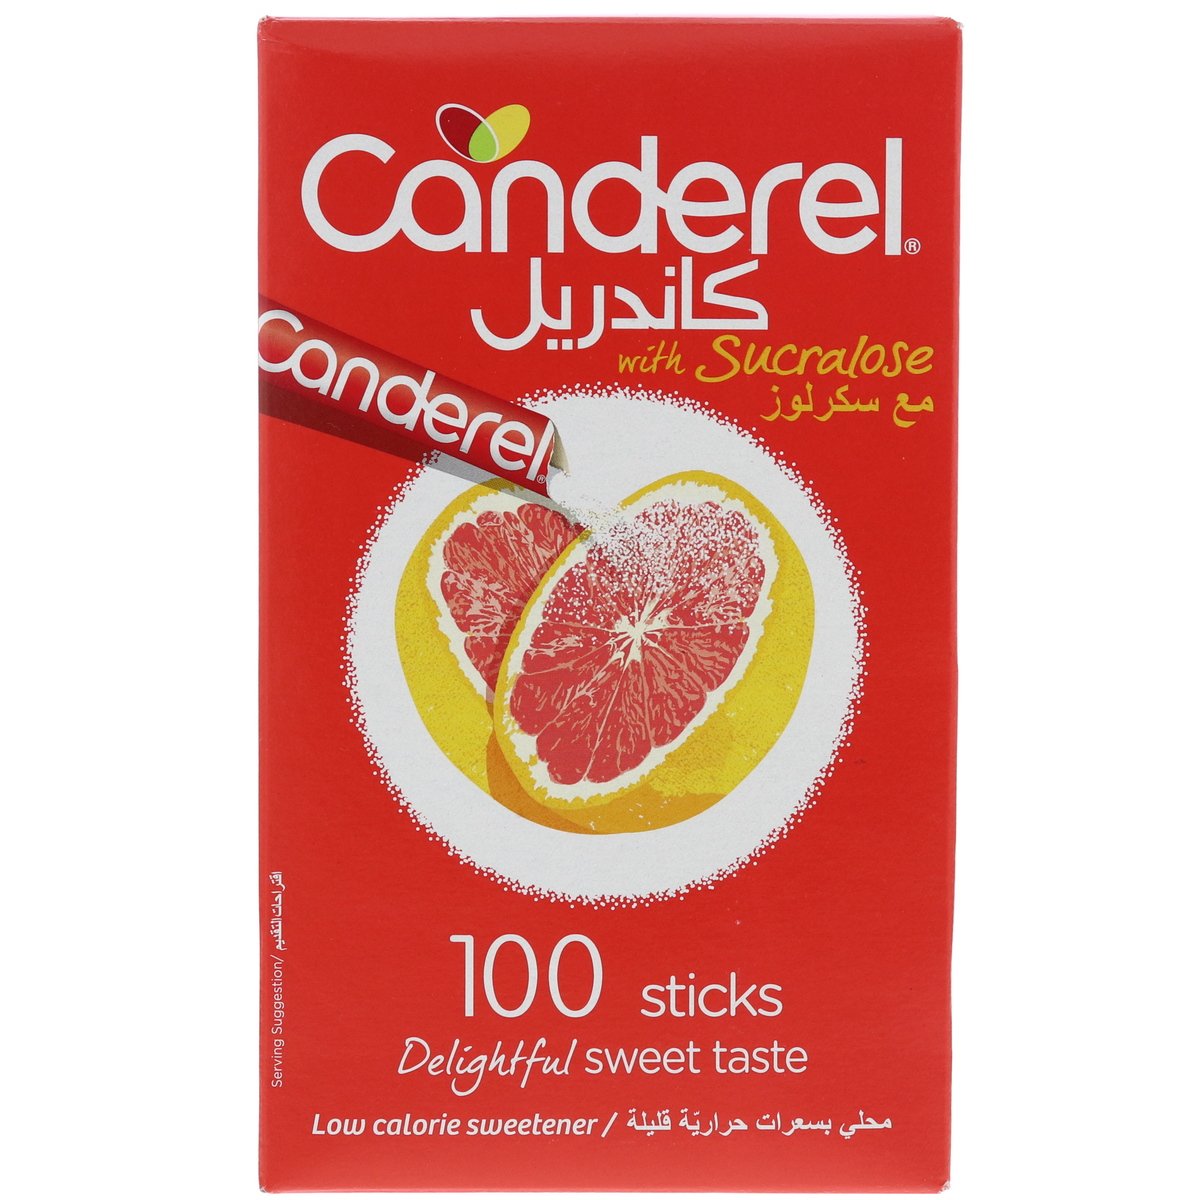 Canderel Low Calorie Sweetener With Sucralose 100 pcs